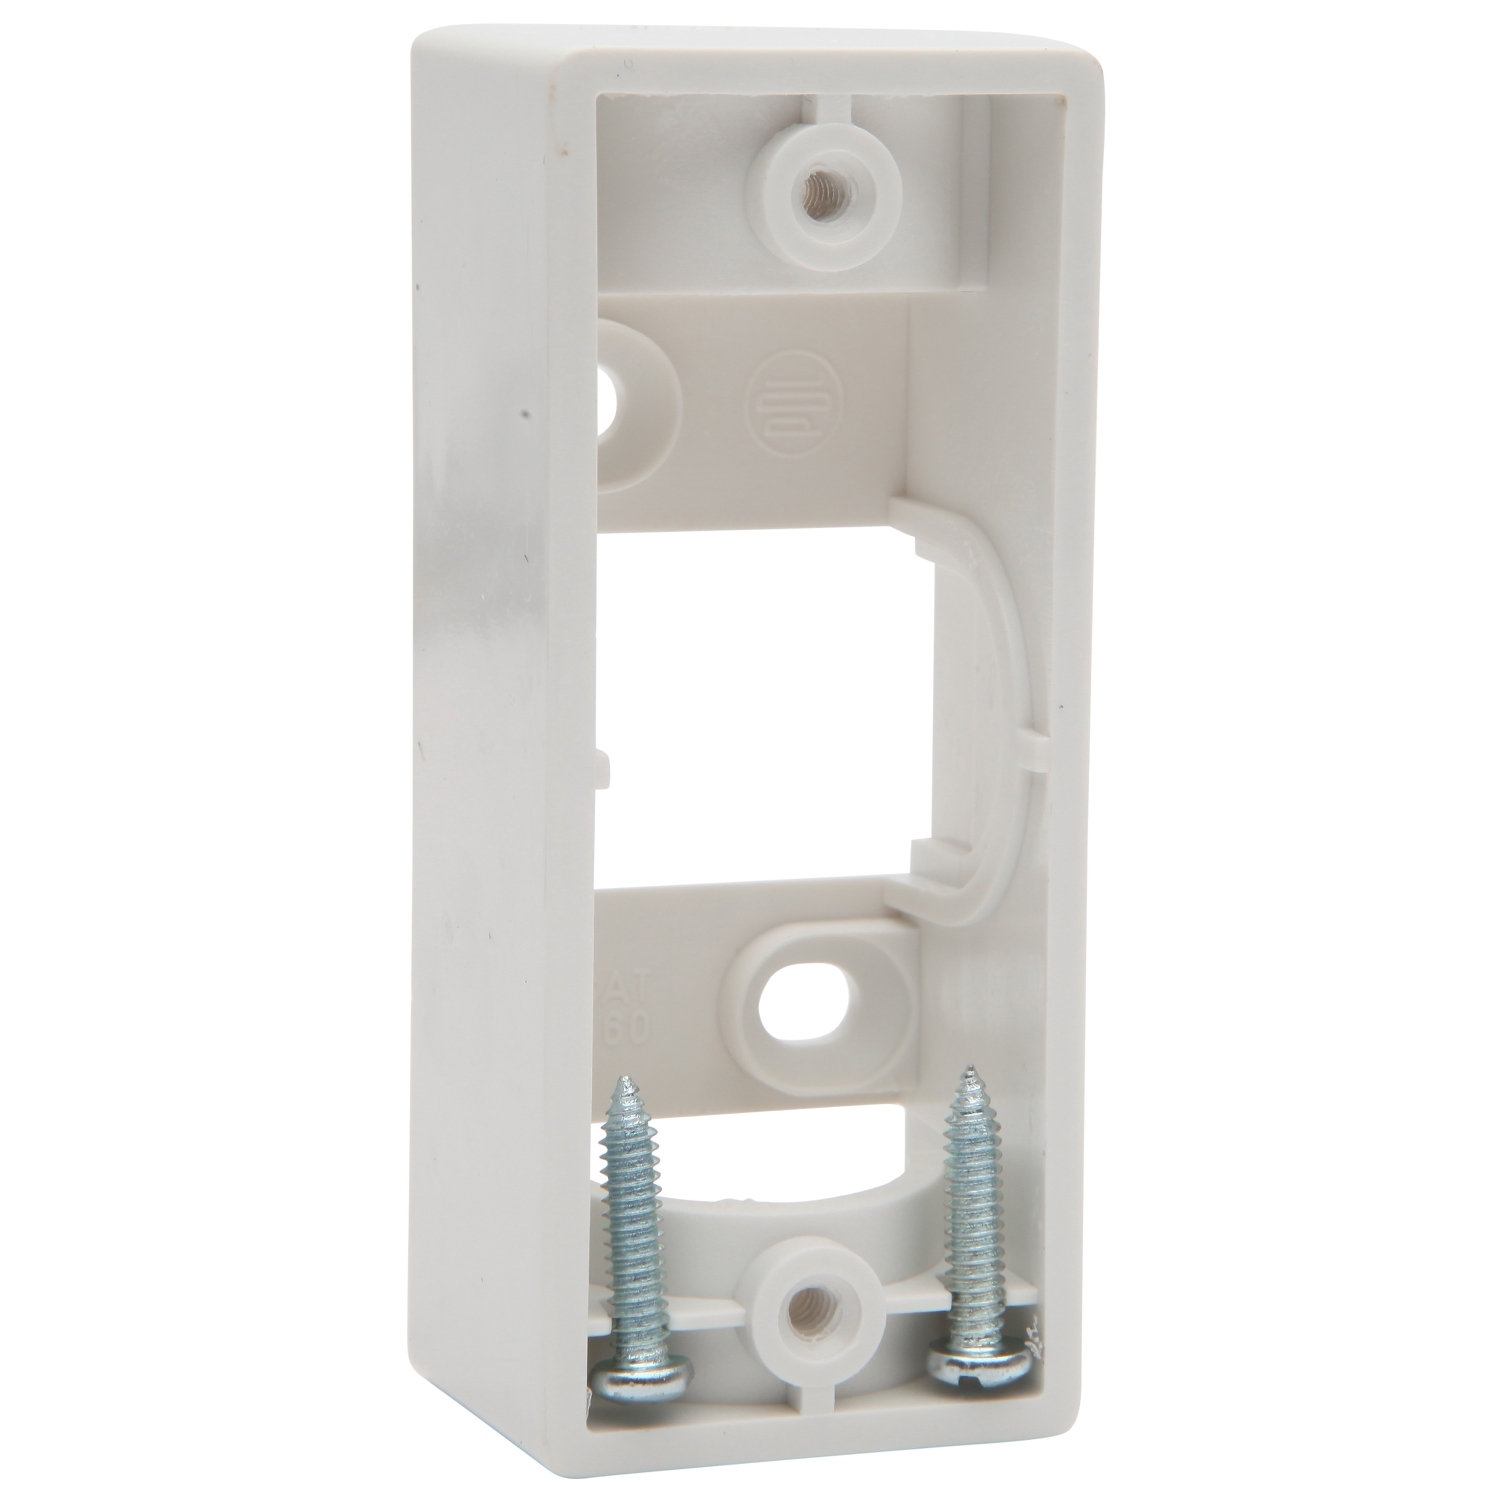 PDL560WH - PDL Architrave Mounting Block for 1&2Gang - White